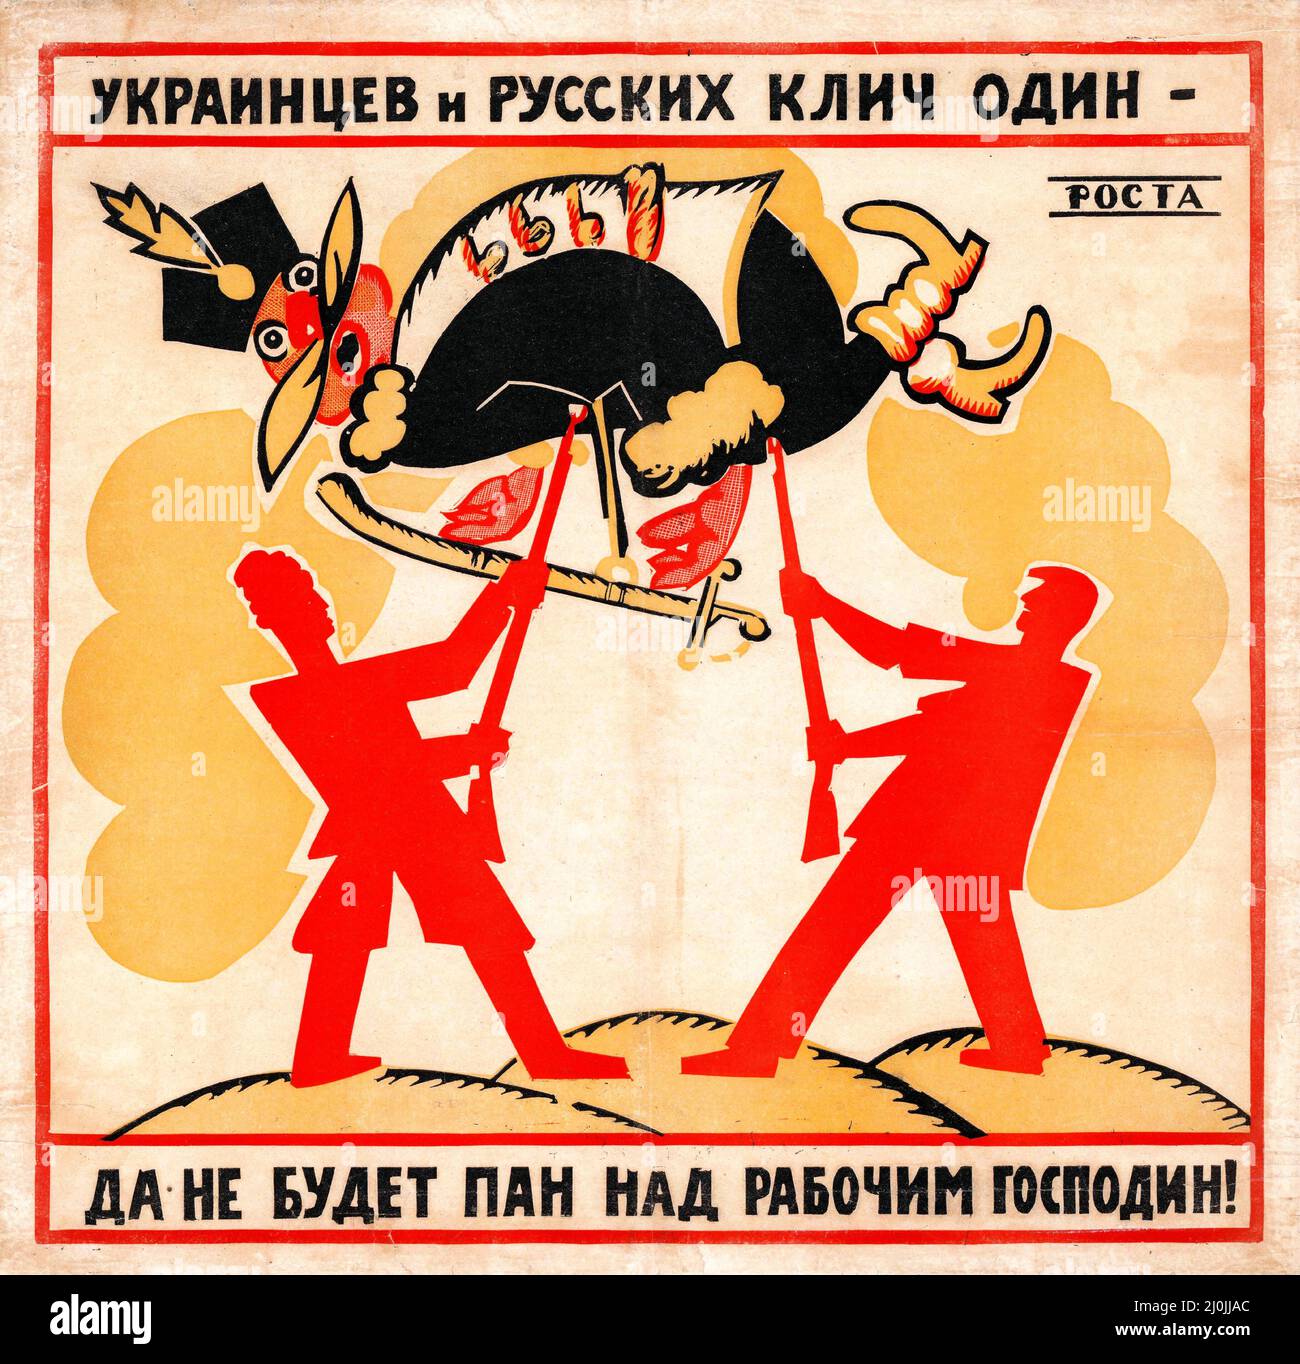 Russian propaganda - Windows of ROSTA (Windows of satire ROSTA). Ukrainians and Russians have one cry - let there be no master over the worker! 1920 Stock Photo